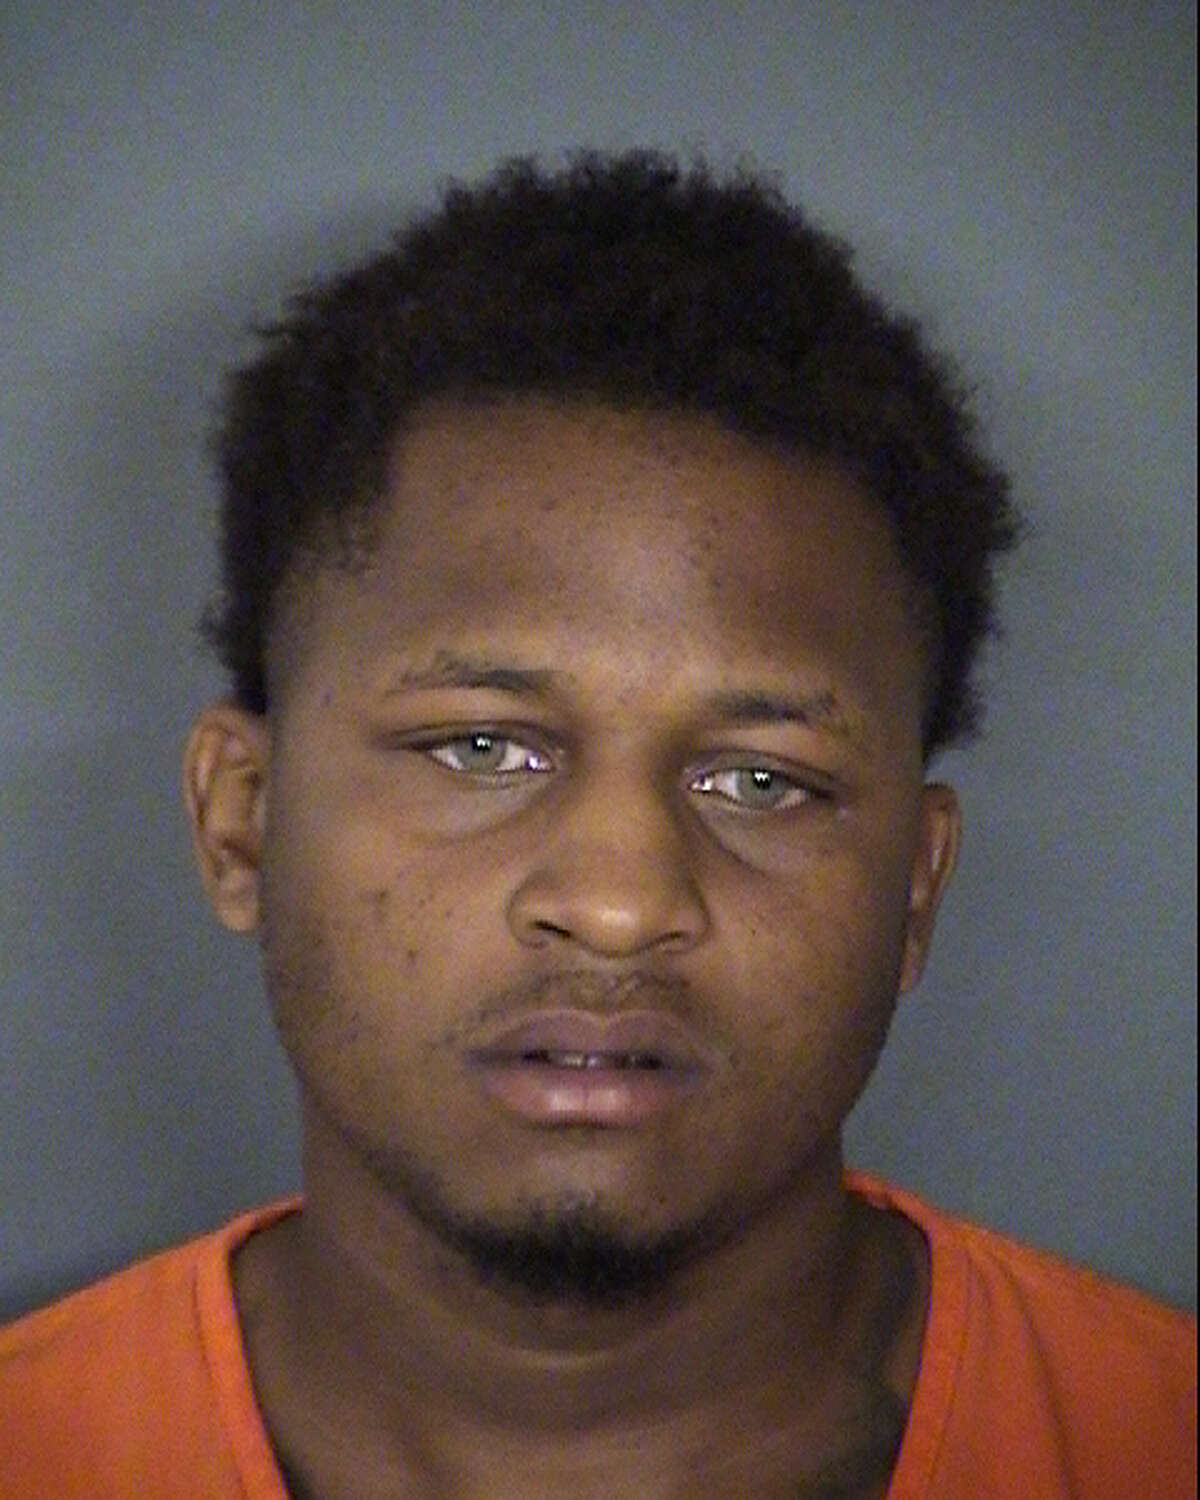 Jamal Wolford was arrested Sunday, May 7, 2017 and faces charges of aggravated sexual assault and aggravated kidnapping.